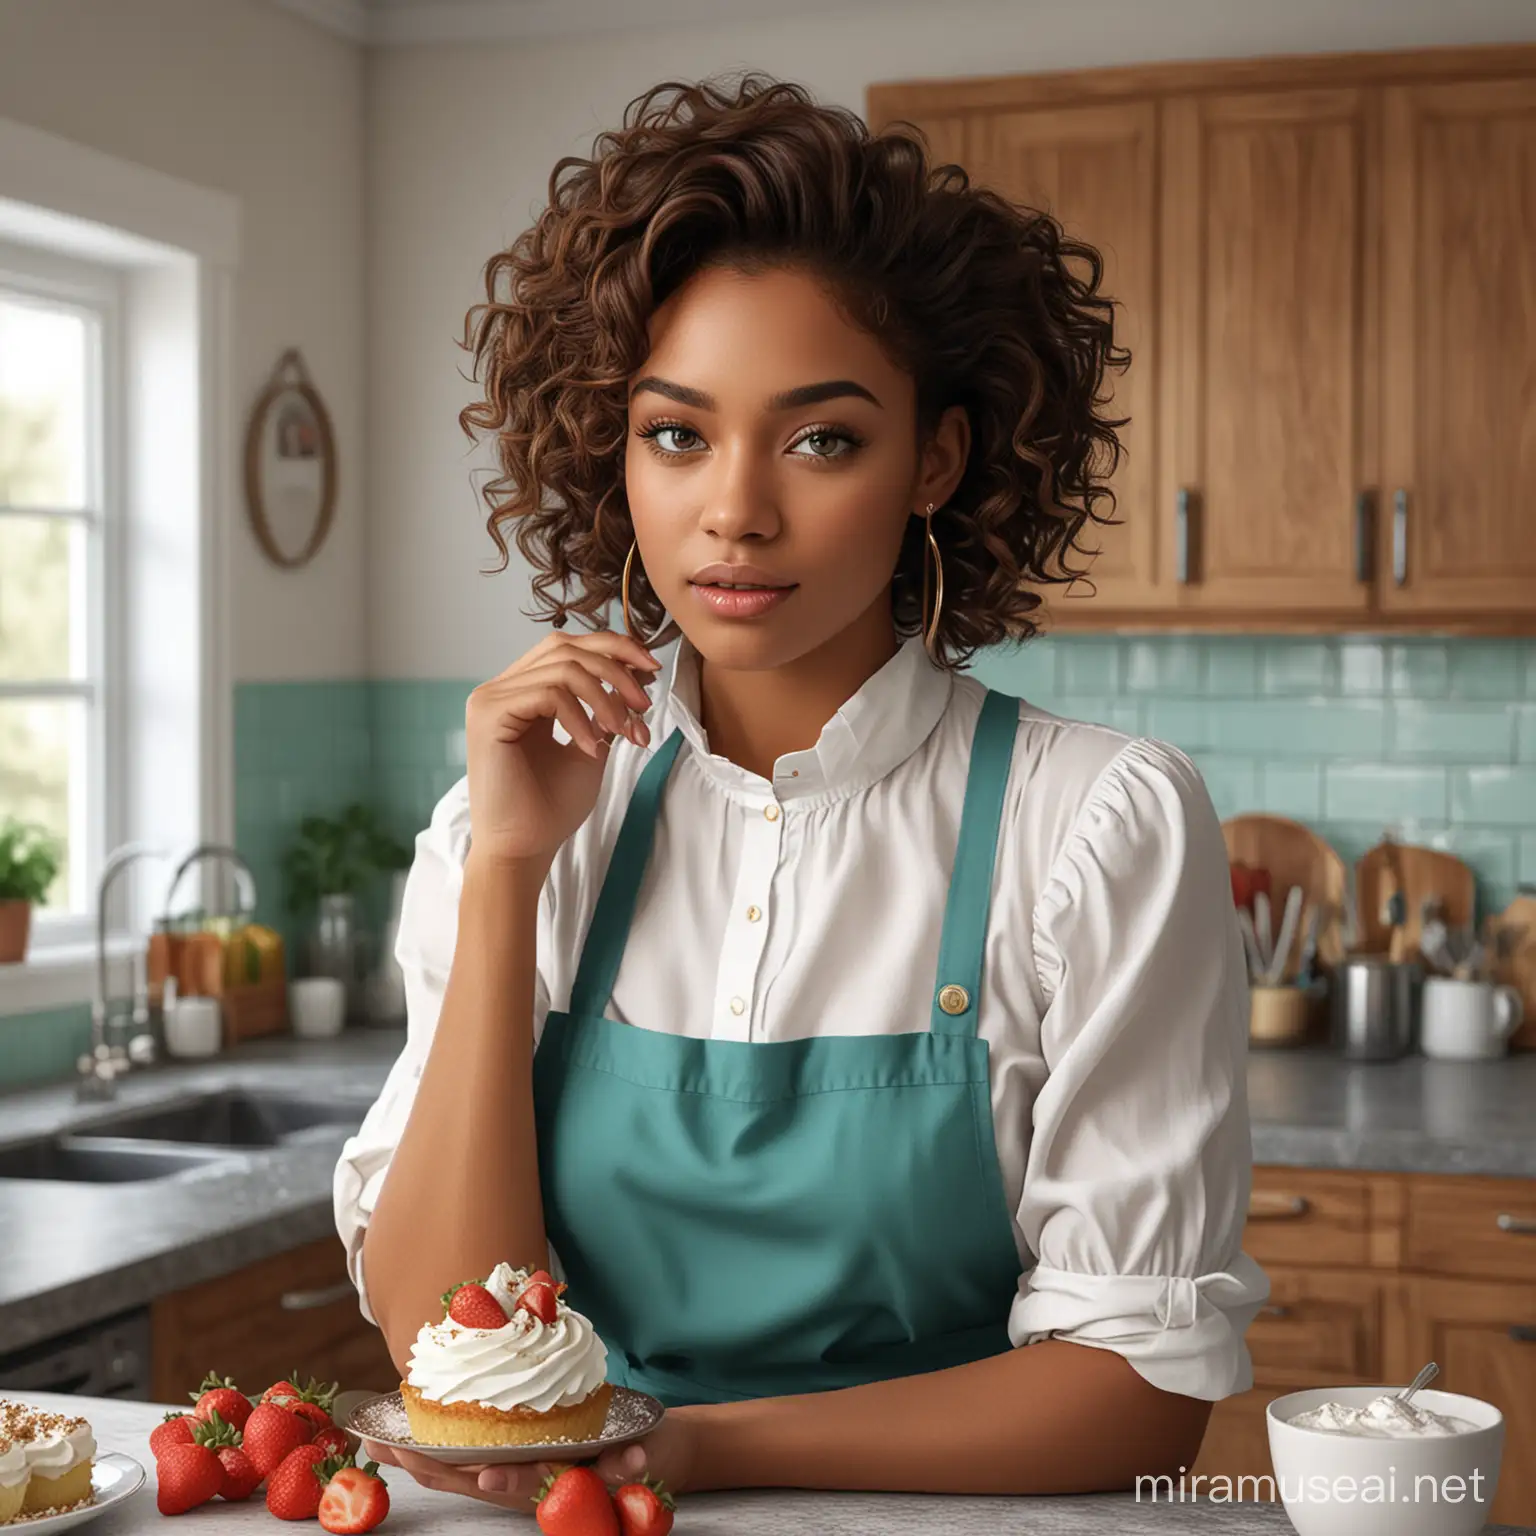 Exquisite Culinary Artistry Curly Haired Woman with Golden Highlights and Teal Apron